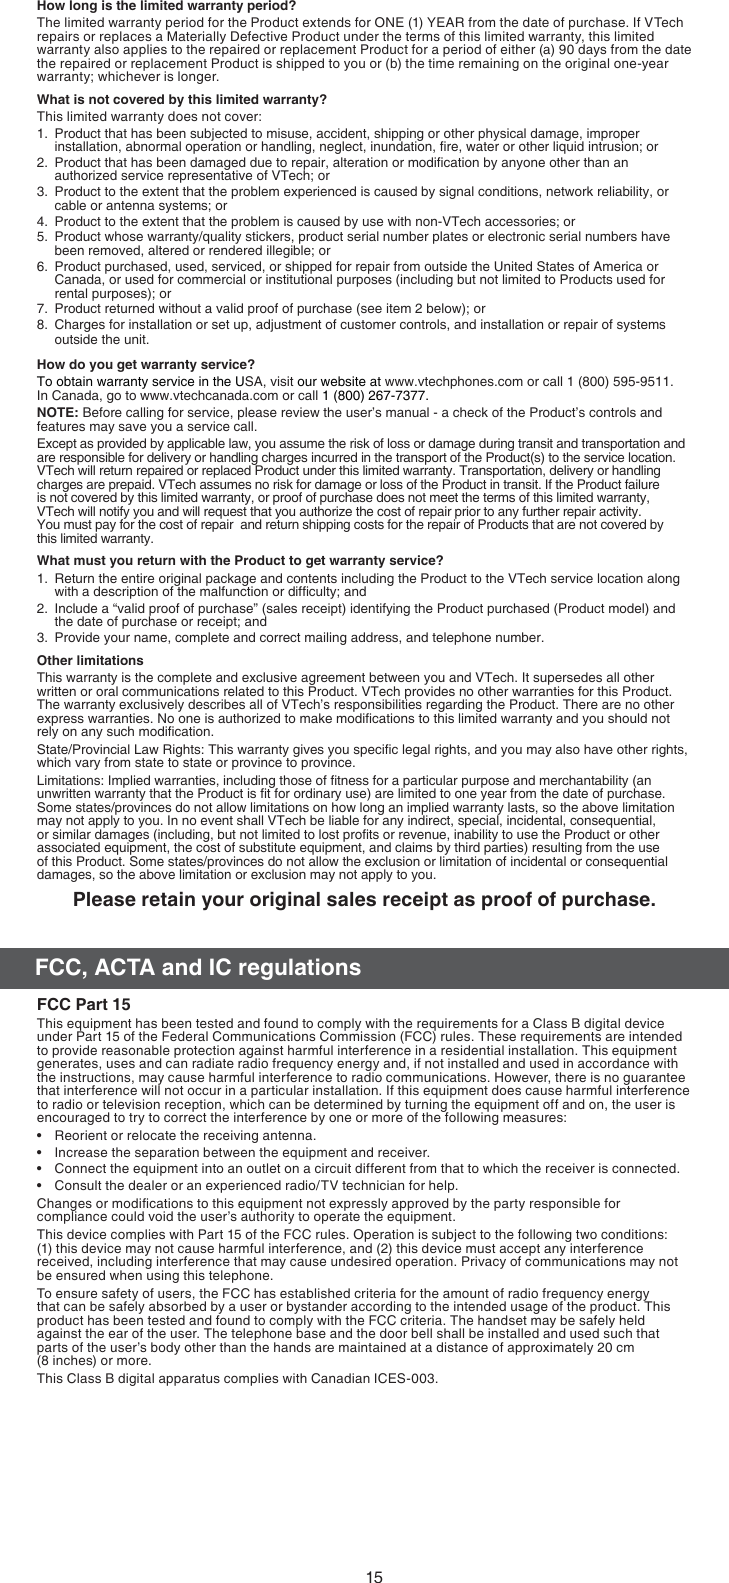 15FCC, ACTA and IC regulationsHow long is the limited warranty period?The limited warranty period for the Product extends for ONE (1) YEAR from the date of purchase. If VTech repairs or replaces a Materially Defective Product under the terms of this limited warranty, this limited warranty also applies to the repaired or replacement Product for a period of either (a) 90 days from the date the repaired or replacement Product is shipped to you or (b) the time remaining on the original one-year warranty; whichever is longer.What is not covered by this limited warranty?This limited warranty does not cover:1.  Product that has been subjected to misuse, accident, shipping or other physical damage, improper installation, abnormal operation or handling, neglect, inundation, ﬁre, water or other liquid intrusion; or2.  Product that has been damaged due to repair, alteration or modiﬁcation by anyone other than an authorized service representative of VTech; or3.  Product to the extent that the problem experienced is caused by signal conditions, network reliability, or cable or antenna systems; or4.  Product to the extent that the problem is caused by use with non-VTech accessories; or5.  Product whose warranty/quality stickers, product serial number plates or electronic serial numbers have been removed, altered or rendered illegible; or6.  Product purchased, used, serviced, or shipped for repair from outside the United States of America or Canada, or used for commercial or institutional purposes (including but not limited to Products used for rental purposes); or7.  Product returned without a valid proof of purchase (see item 2 below); or8.  Charges for installation or set up, adjustment of customer controls, and installation or repair of systems outside the unit.How do you get warranty service?To obtain warranty service in the USA, visit our website at www.vtechphones.com or call 1 (800) 595-9511.  In Canada, go to www.vtechcanada.com or call 1 (800) 267-7377.NOTE: Before calling for service, please review the user’s manual - a check of the Product’s controls and features may save you a service call.Except as provided by applicable law, you assume the risk of loss or damage during transit and transportation and are responsible for delivery or handling charges incurred in the transport of the Product(s) to the service location. VTech will return repaired or replaced Product under this limited warranty. Transportation, delivery or handling charges are prepaid. VTech assumes no risk for damage or loss of the Product in transit. If the Product failure is not covered by this limited warranty, or proof of purchase does not meet the terms of this limited warranty, VTech will notify you and will request that you authorize the cost of repair prior to any further repair activity.                    You must pay for the cost of repair  and return shipping costs for the repair of Products that are not covered by   this limited warranty.What must you return with the Product to get warranty service?1.  Return the entire original package and contents including the Product to the VTech service location along  with a description of the malfunction or difﬁculty; and2.  Include a “valid proof of purchase” (sales receipt) identifying the Product purchased (Product model) and the date of purchase or receipt; and3.  Provide your name, complete and correct mailing address, and telephone number.Other limitationsThis warranty is the complete and exclusive agreement between you and VTech. It supersedes all other written or oral communications related to this Product. VTech provides no other warranties for this Product. The warranty exclusively describes all of VTech’s responsibilities regarding the Product. There are no other express warranties. No one is authorized to make modiﬁcations to this limited warranty and you should not rely on any such modiﬁcation.State/Provincial Law Rights: This warranty gives you speciﬁc legal rights, and you may also have other rights, which vary from state to state or province to province.Limitations: Implied warranties, including those of ﬁtness for a particular purpose and merchantability (an unwritten warranty that the Product is ﬁt for ordinary use) are limited to one year from the date of purchase. Some states/provinces do not allow limitations on how long an implied warranty lasts, so the above limitation may not apply to you. In no event shall VTech be liable for any indirect, special, incidental, consequential, or similar damages (including, but not limited to lost proﬁts or revenue, inability to use the Product or other associated equipment, the cost of substitute equipment, and claims by third parties) resulting from the use of this Product. Some states/provinces do not allow the exclusion or limitation of incidental or consequential damages, so the above limitation or exclusion may not apply to you.Please retain your original sales receipt as proof of purchase.FCC Part 15This equipment has been tested and found to comply with the requirements for a Class B digital device under Part 15 of the Federal Communications Commission (FCC) rules. These requirements are intended to provide reasonable protection against harmful interference in a residential installation. This equipment generates, uses and can radiate radio frequency energy and, if not installed and used in accordance with the instructions, may cause harmful interference to radio communications. However, there is no guarantee that interference will not occur in a particular installation. If this equipment does cause harmful interference to radio or television reception, which can be determined by turning the equipment off and on, the user is encouraged to try to correct the interference by one or more of the following measures:Reorient or relocate the receiving antenna.Increase the separation between the equipment and receiver.Connect the equipment into an outlet on a circuit different from that to which the receiver is connected.Consult the dealer or an experienced radio/TV technician for help.Changes or modiﬁcations to this equipment not expressly approved by the party responsible for compliance could void the user’s authority to operate the equipment.This device complies with Part 15 of the FCC rules. Operation is subject to the following two conditions:       (1) this device may not cause harmful interference, and (2) this device must accept any interference received, including interference that may cause undesired operation. Privacy of communications may not be ensured when using this telephone.To ensure safety of users, the FCC has established criteria for the amount of radio frequency energy that can be safely absorbed by a user or bystander according to the intended usage of the product. This product has been tested and found to comply with the FCC criteria. The handset may be safely held against the ear of the user. The telephone base and the door bell shall be installed and used such that parts of the user’s body other than the hands are maintained at a distance of approximately 20 cm  (8 inches) or more.This Class B digital apparatus complies with Canadian ICES-003.••••